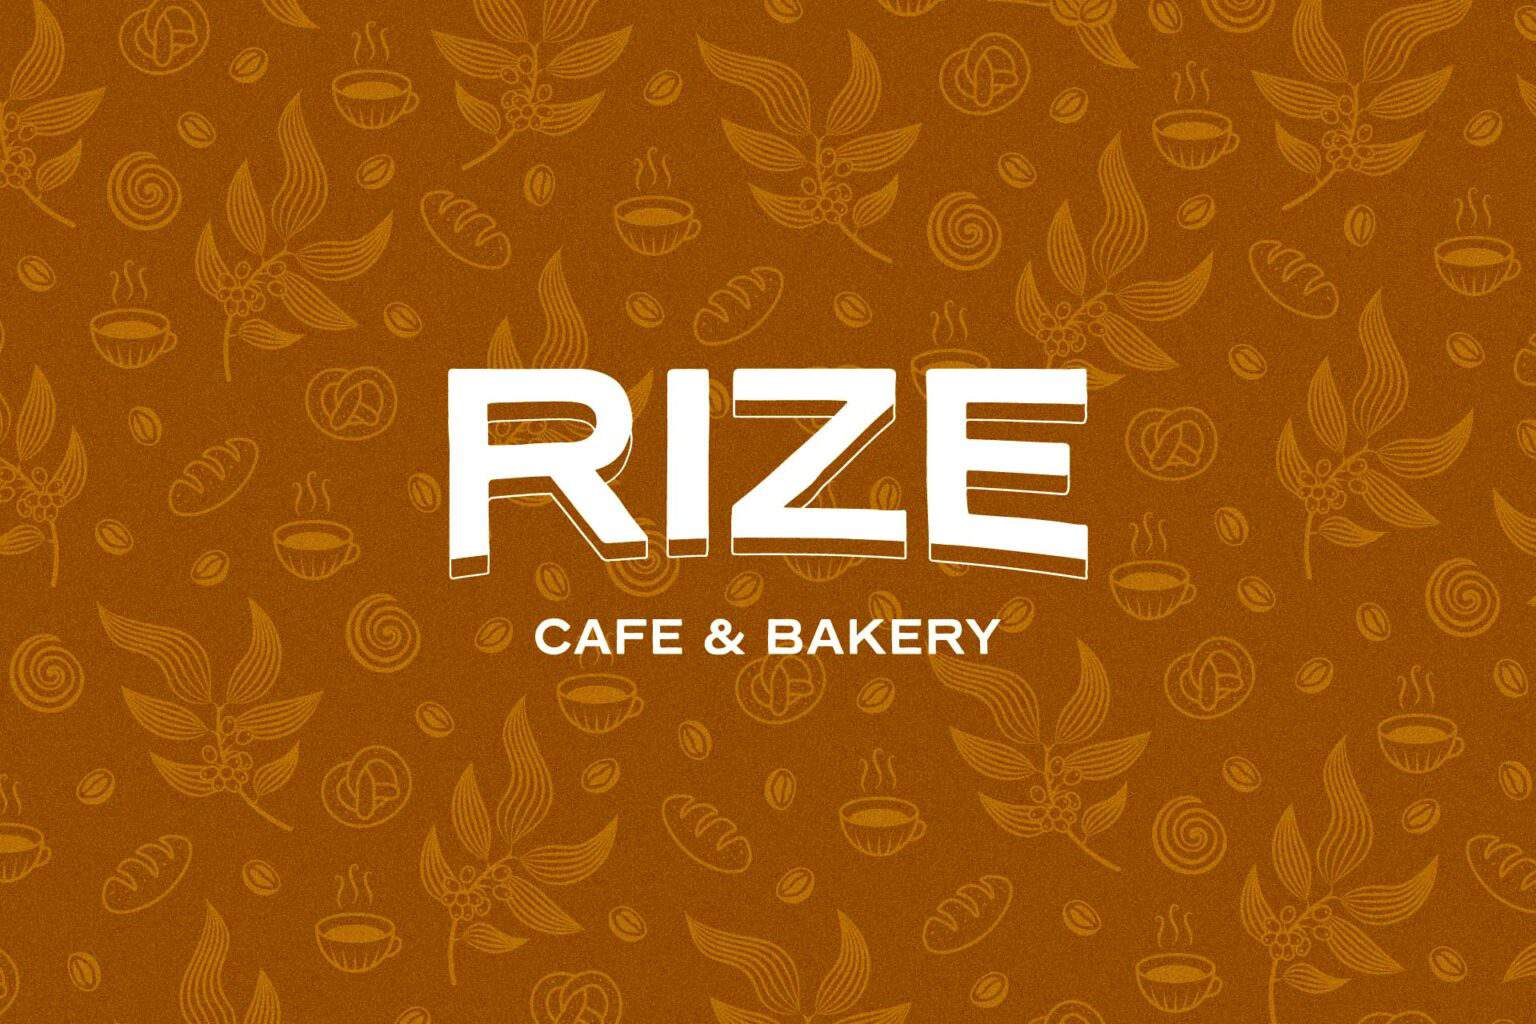 Rize wordmark logo on an illustrated coffee theme pattern background.